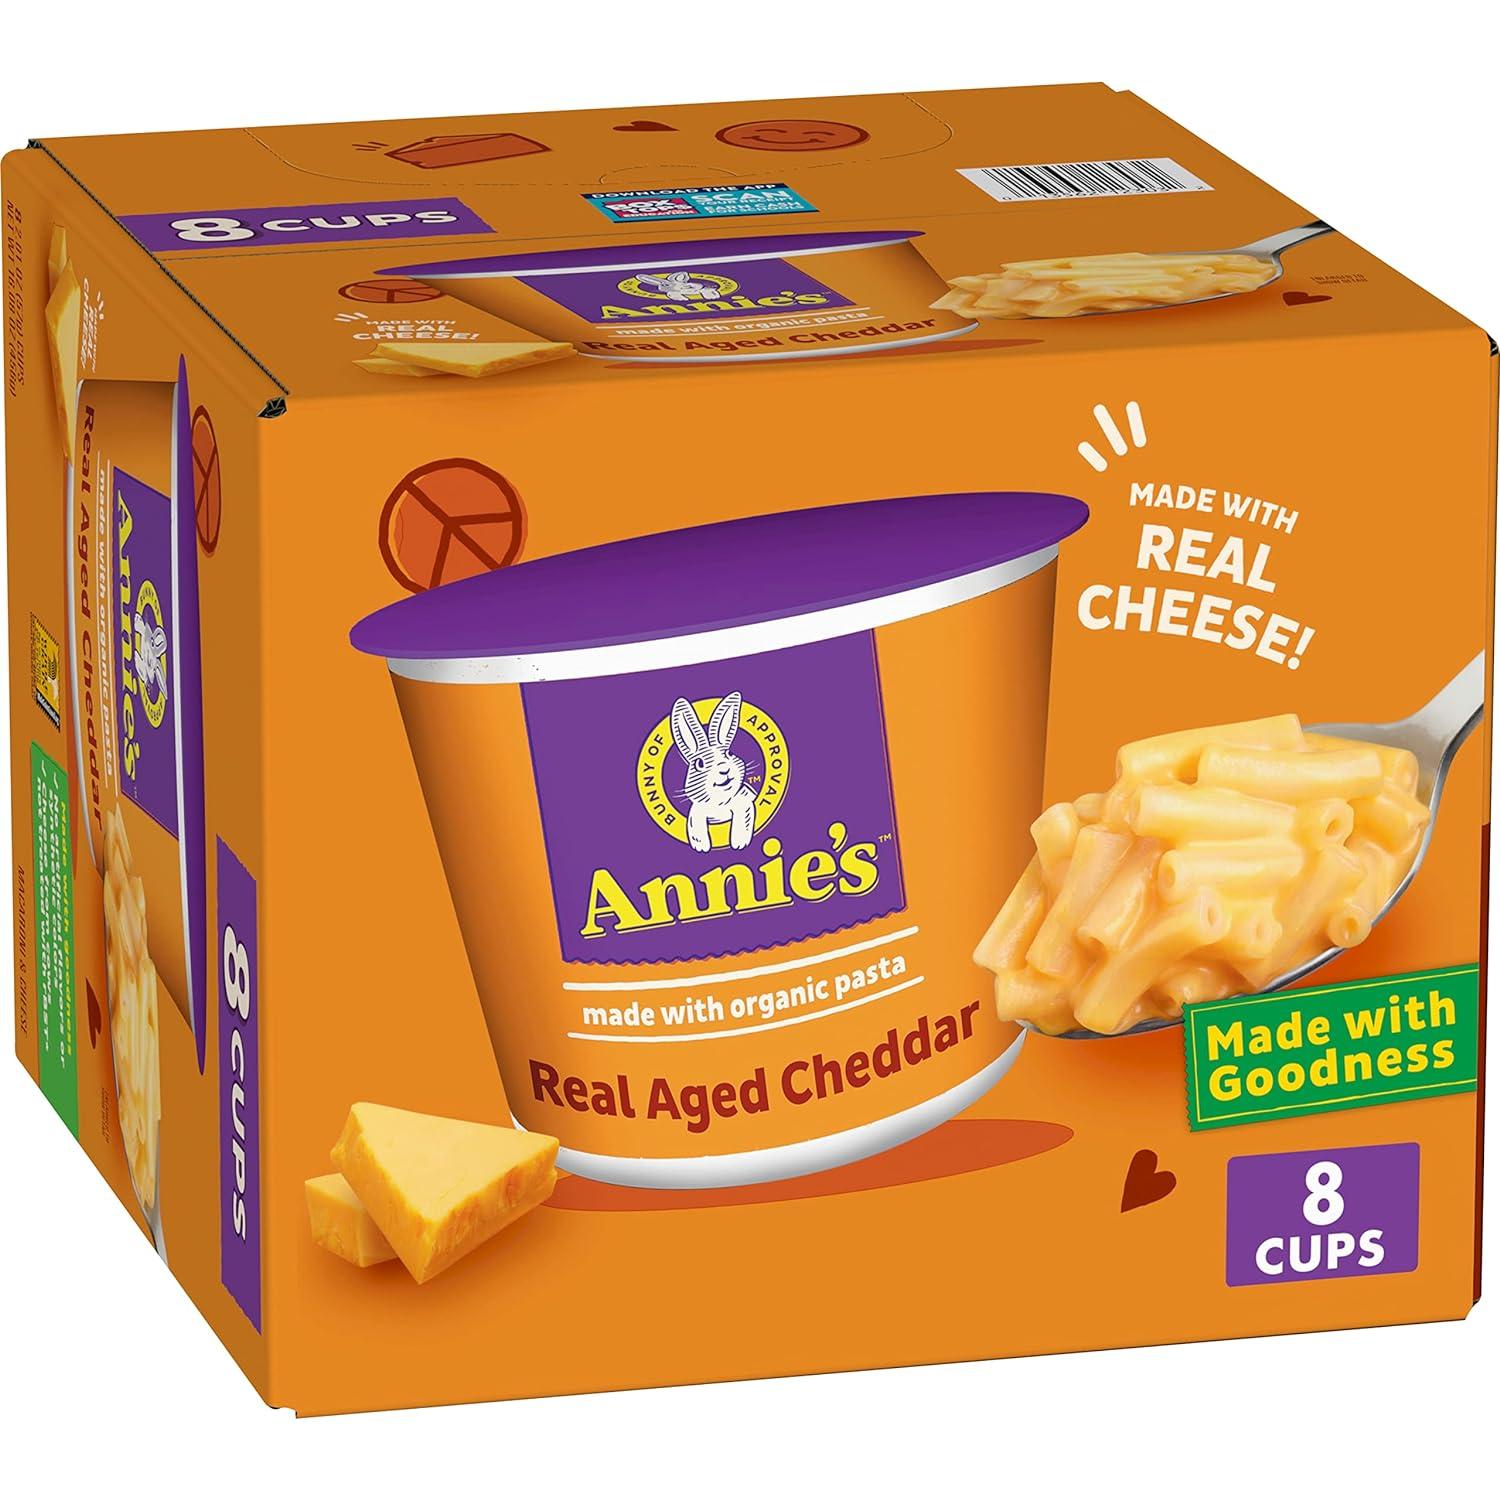 Annies Real Aged Cheddar Microwave Mac and Cheese Cup 32 Pack for $22.96 Shipped